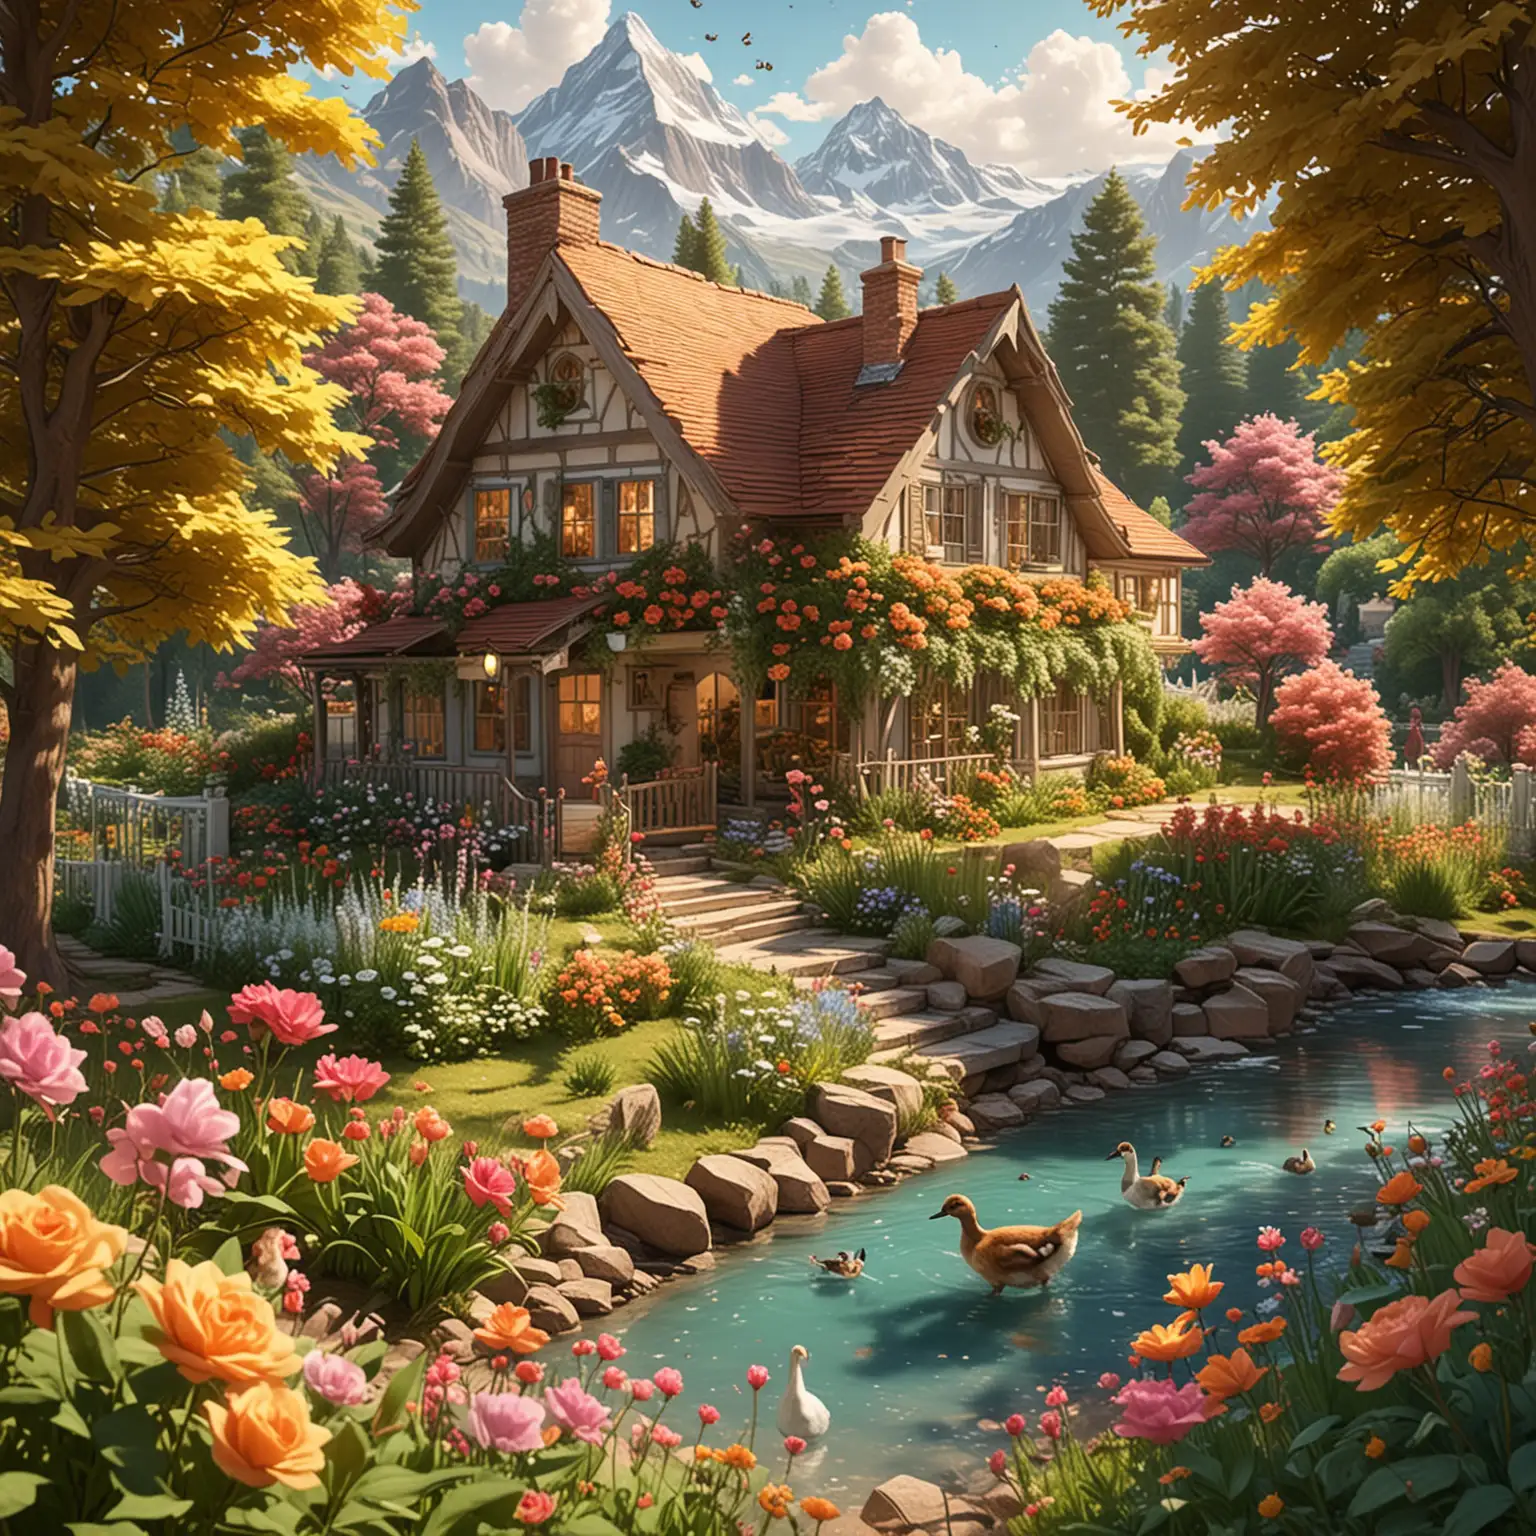 Eevee Building a Cozy House by a Sparkling River Amidst Majestic Mountains and Lush Forest